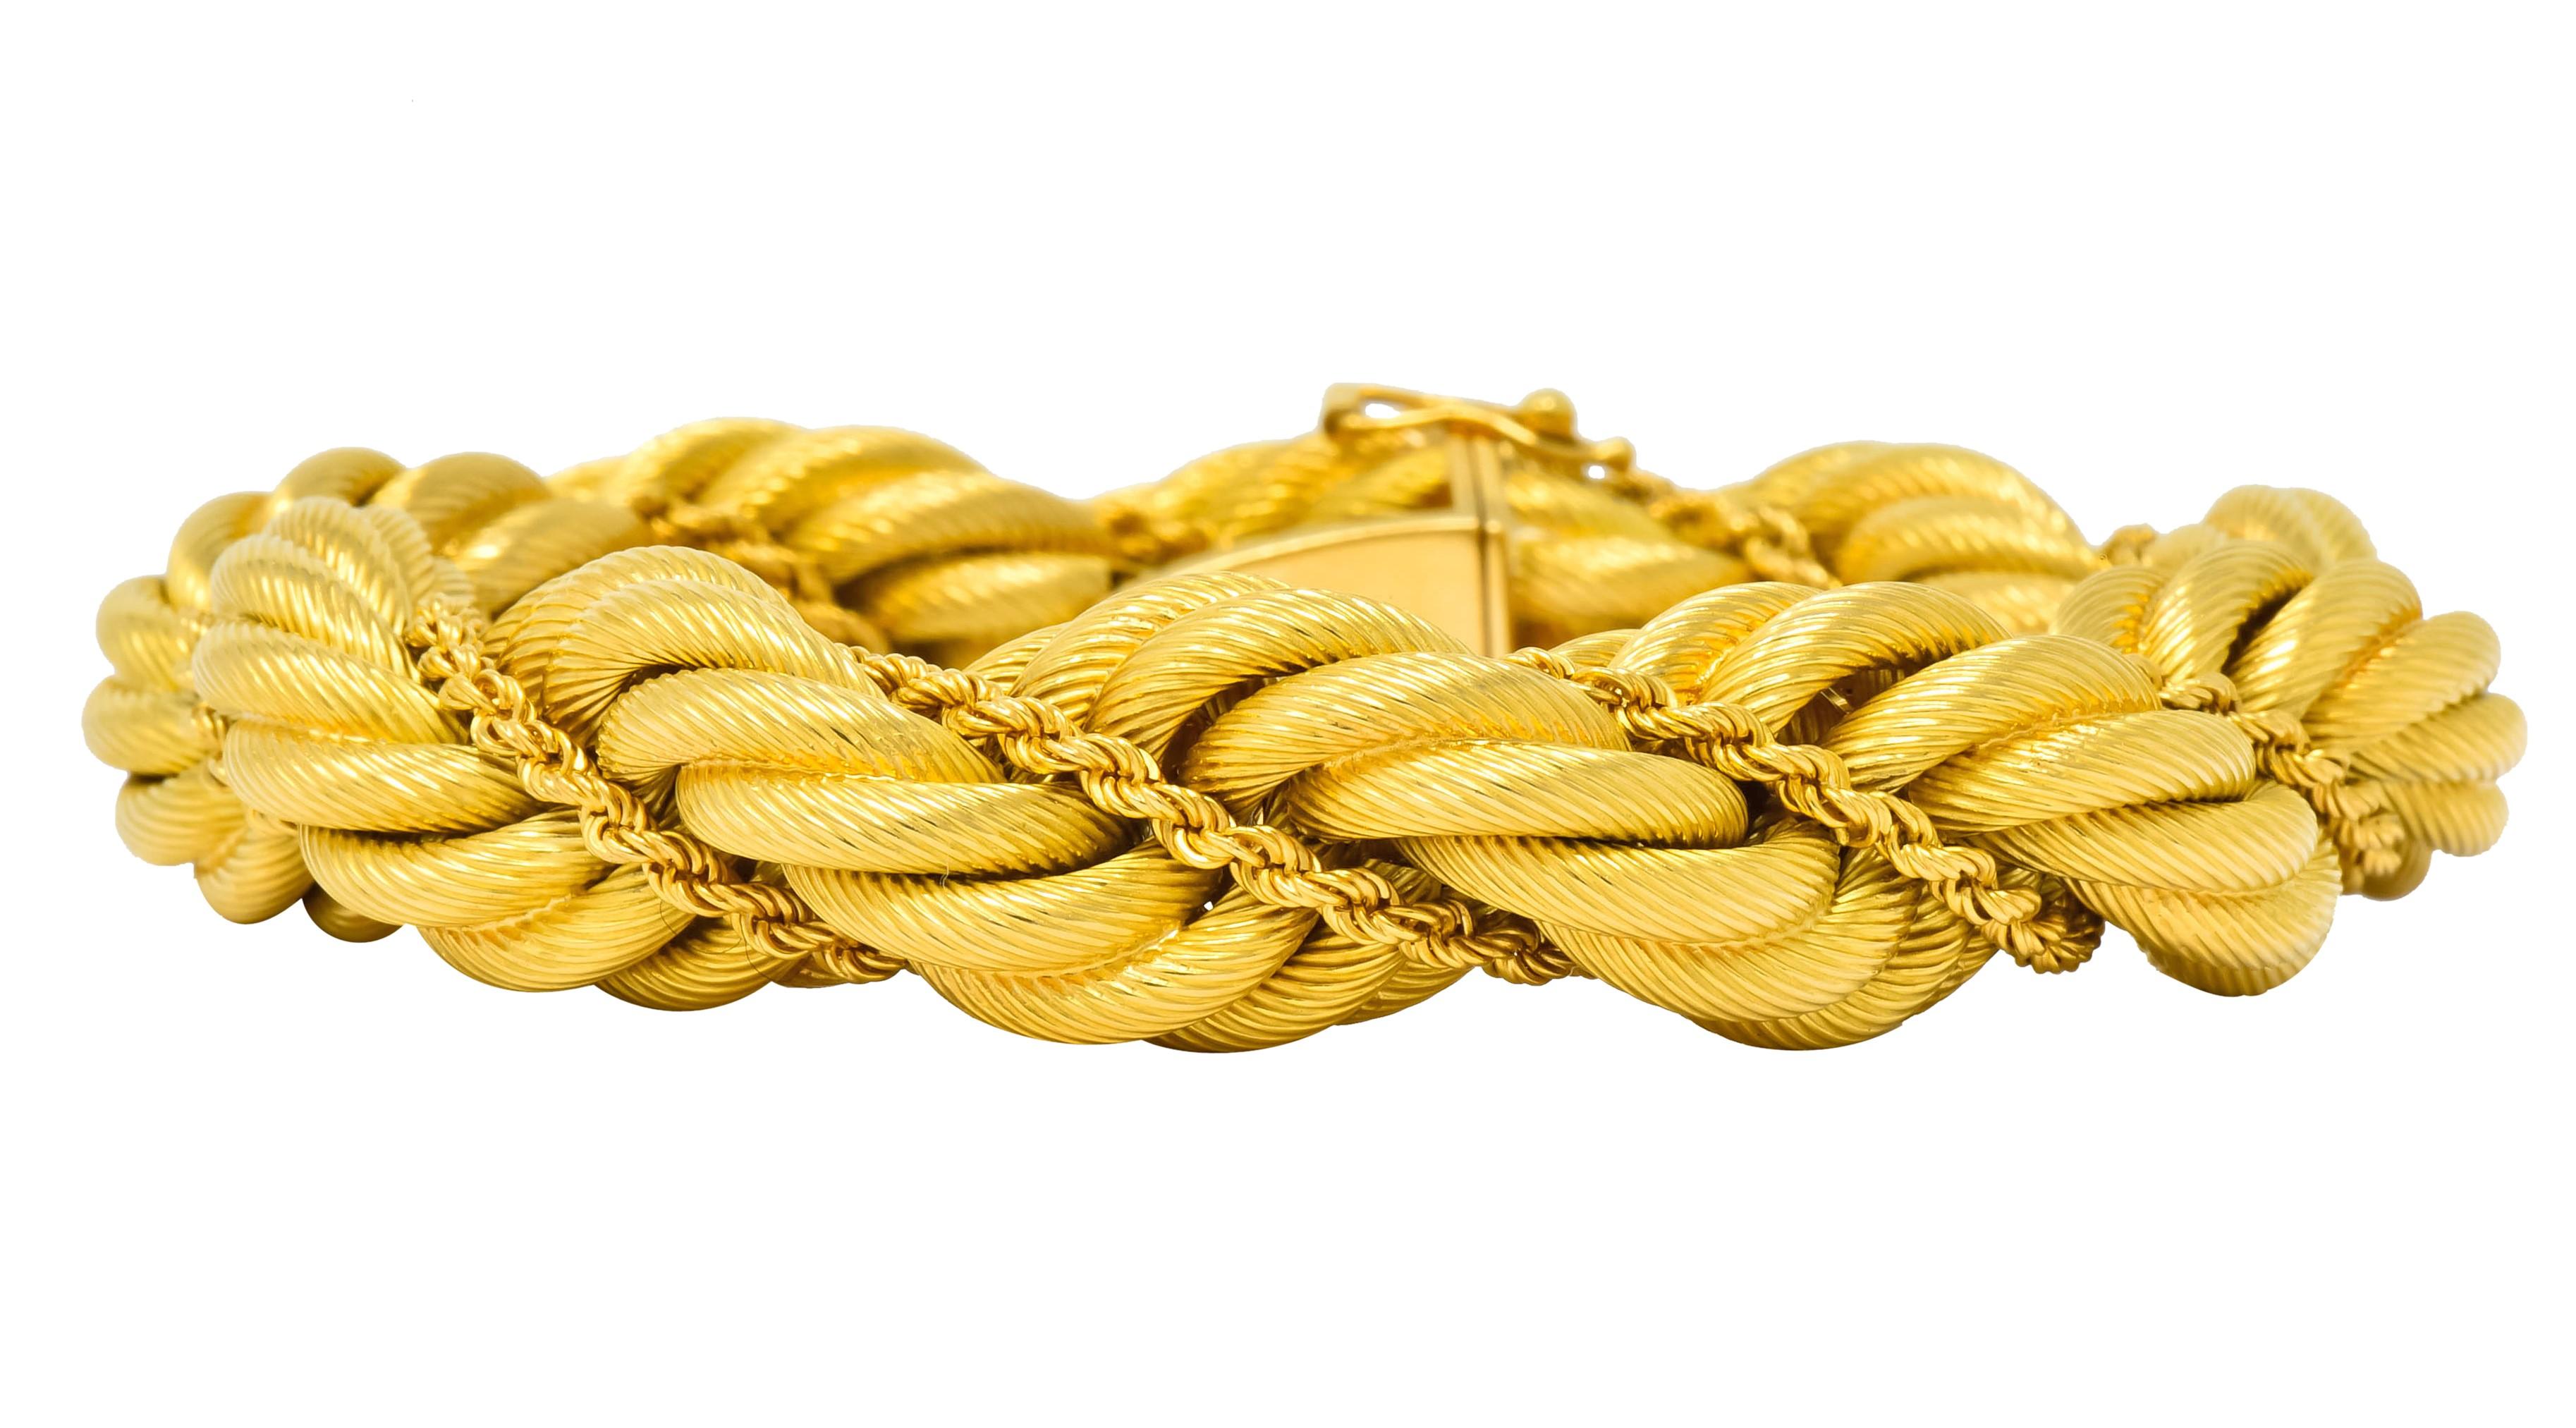 Bracelet designed as a large twisted rope motif depicting a ridged texture
Intertwined with a small rope chain

Completed by a concealed clasp with two figure eight safeties

Fully signed Tiffany & Co. Italy and stamped 18k for 18 karat gold

Circa